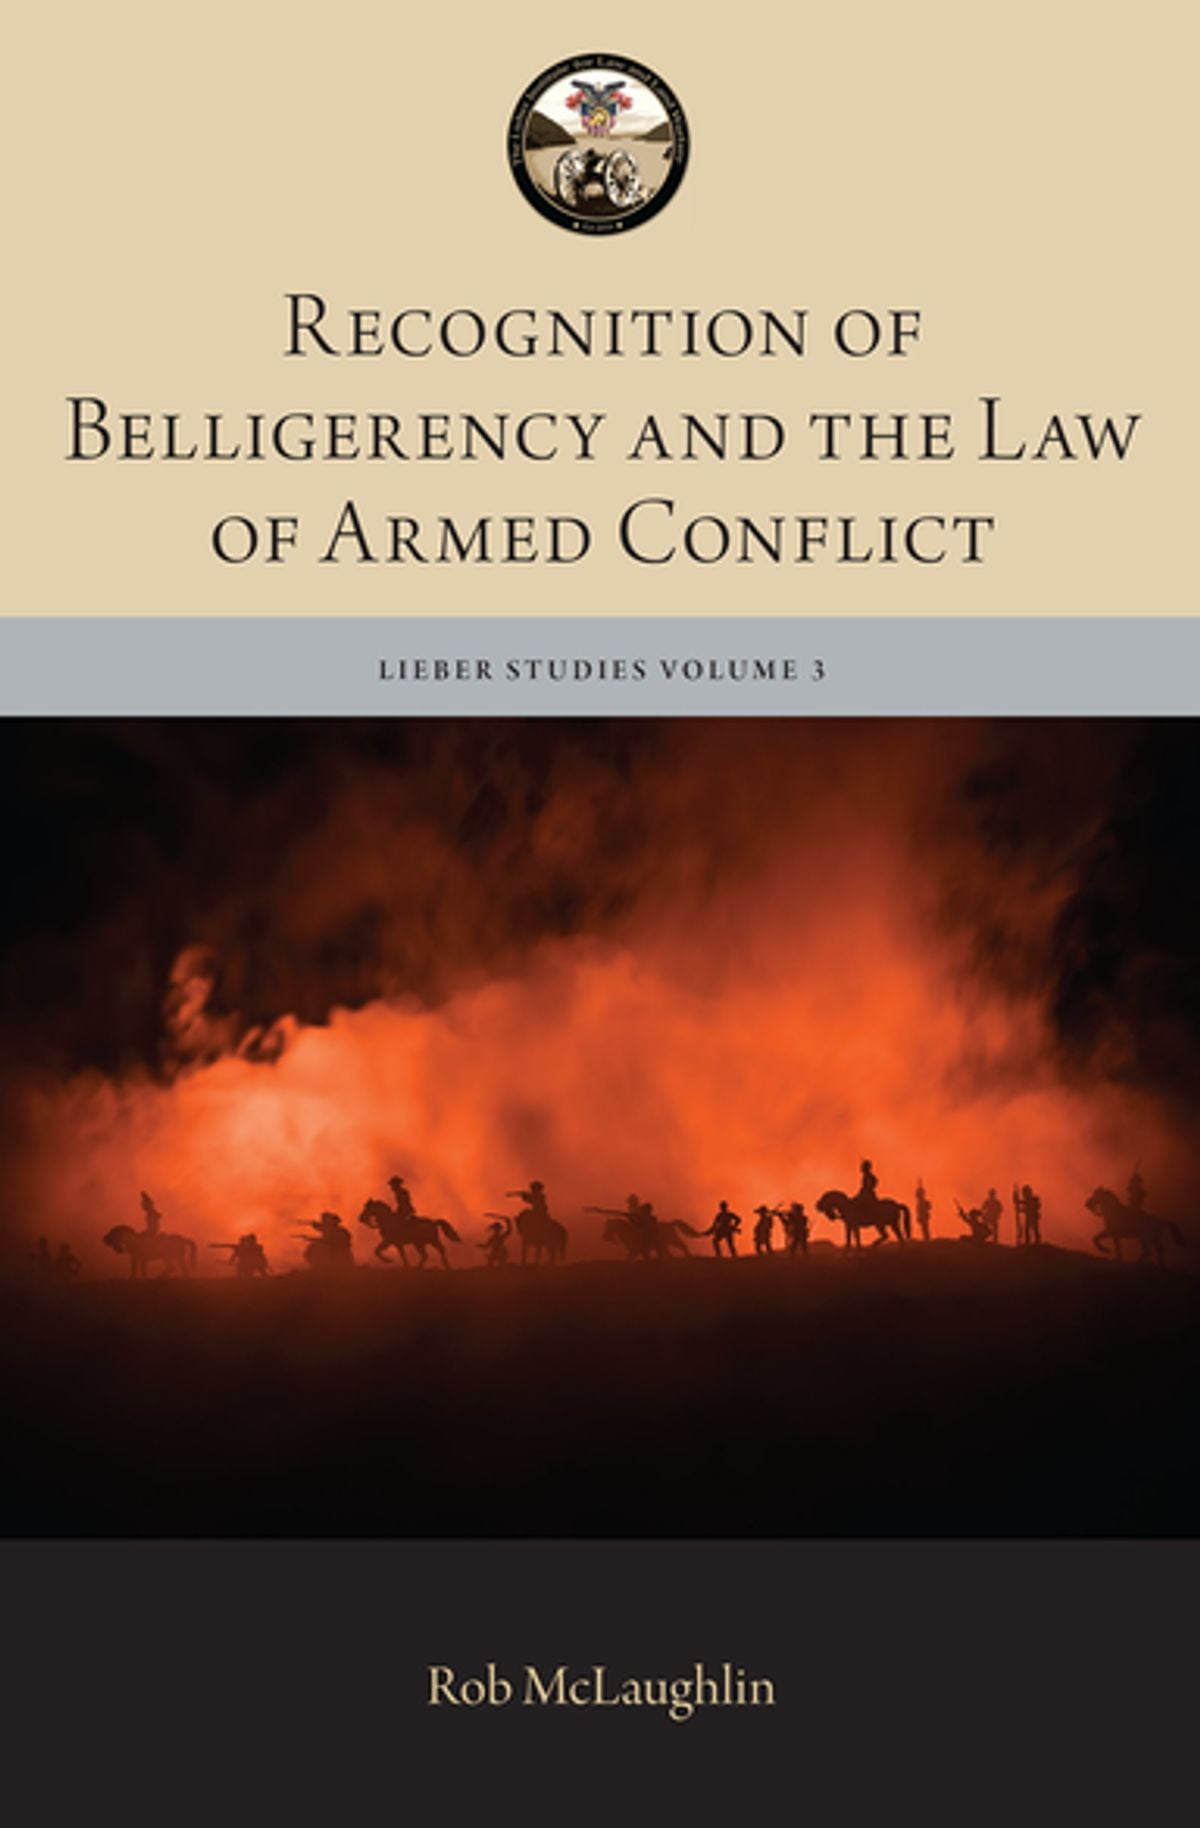 article III conflict law of armed conflict